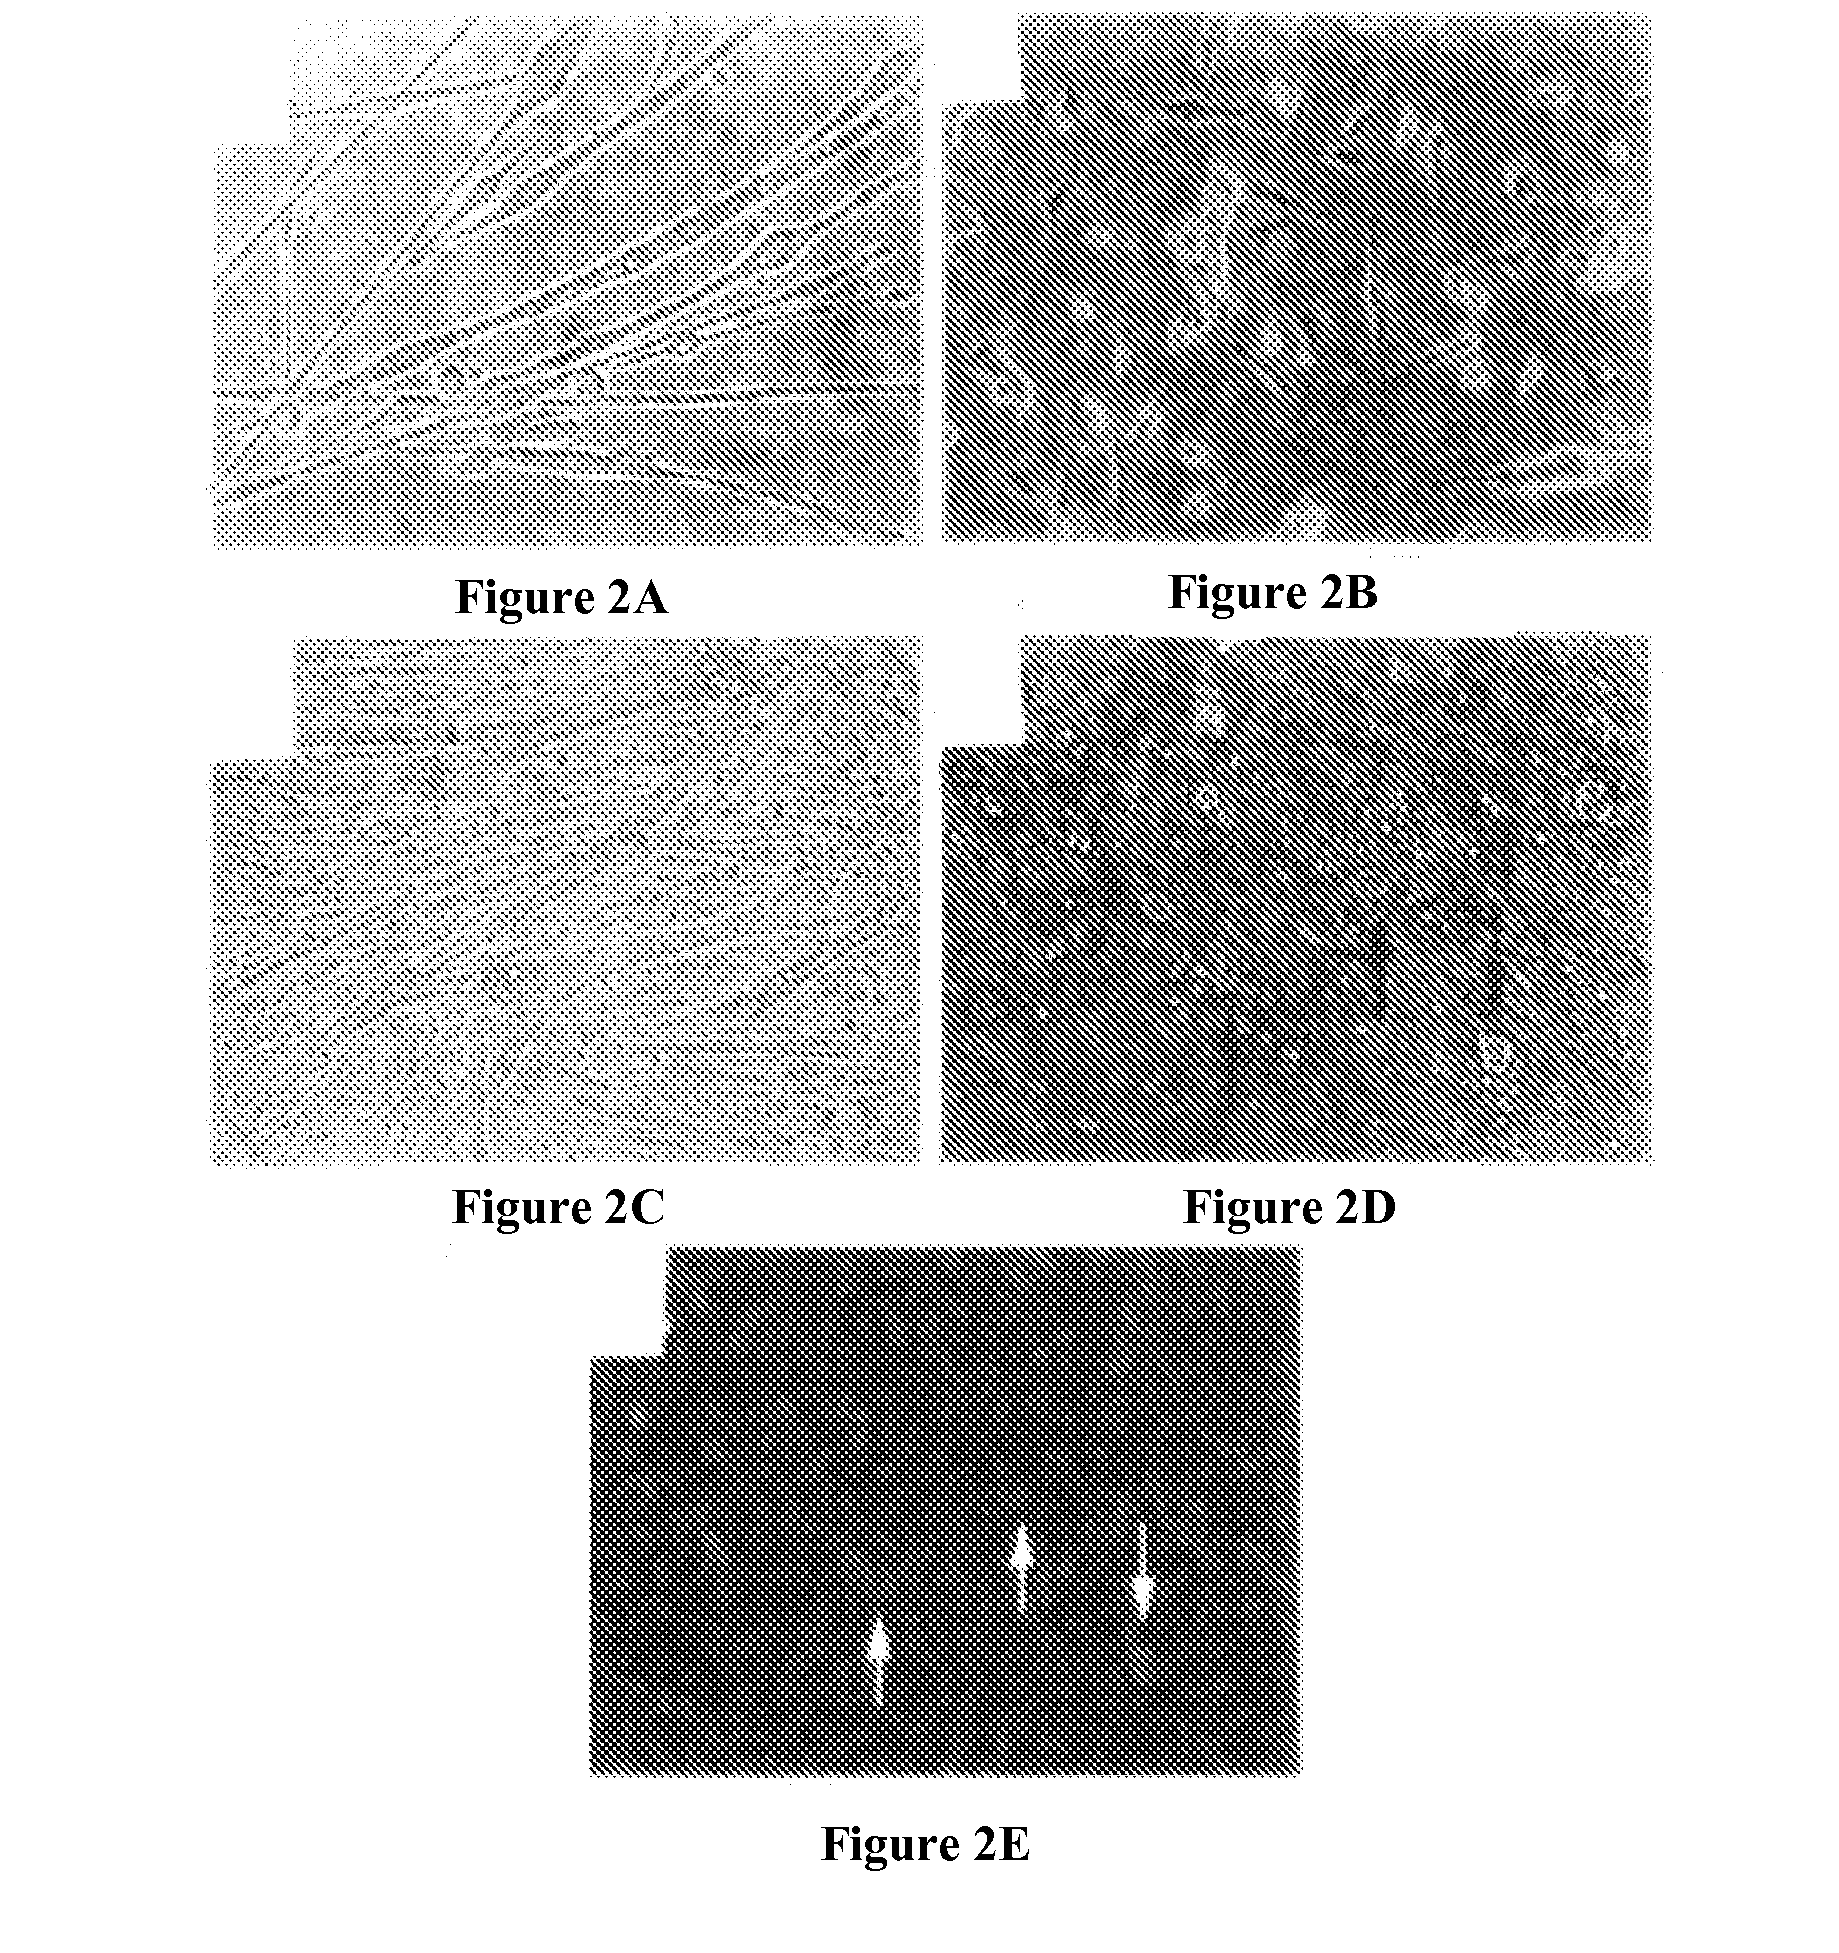 Bone Augmentation Utilizing Muscle-Derived Progenitor Compositions, And Treatments Thereof